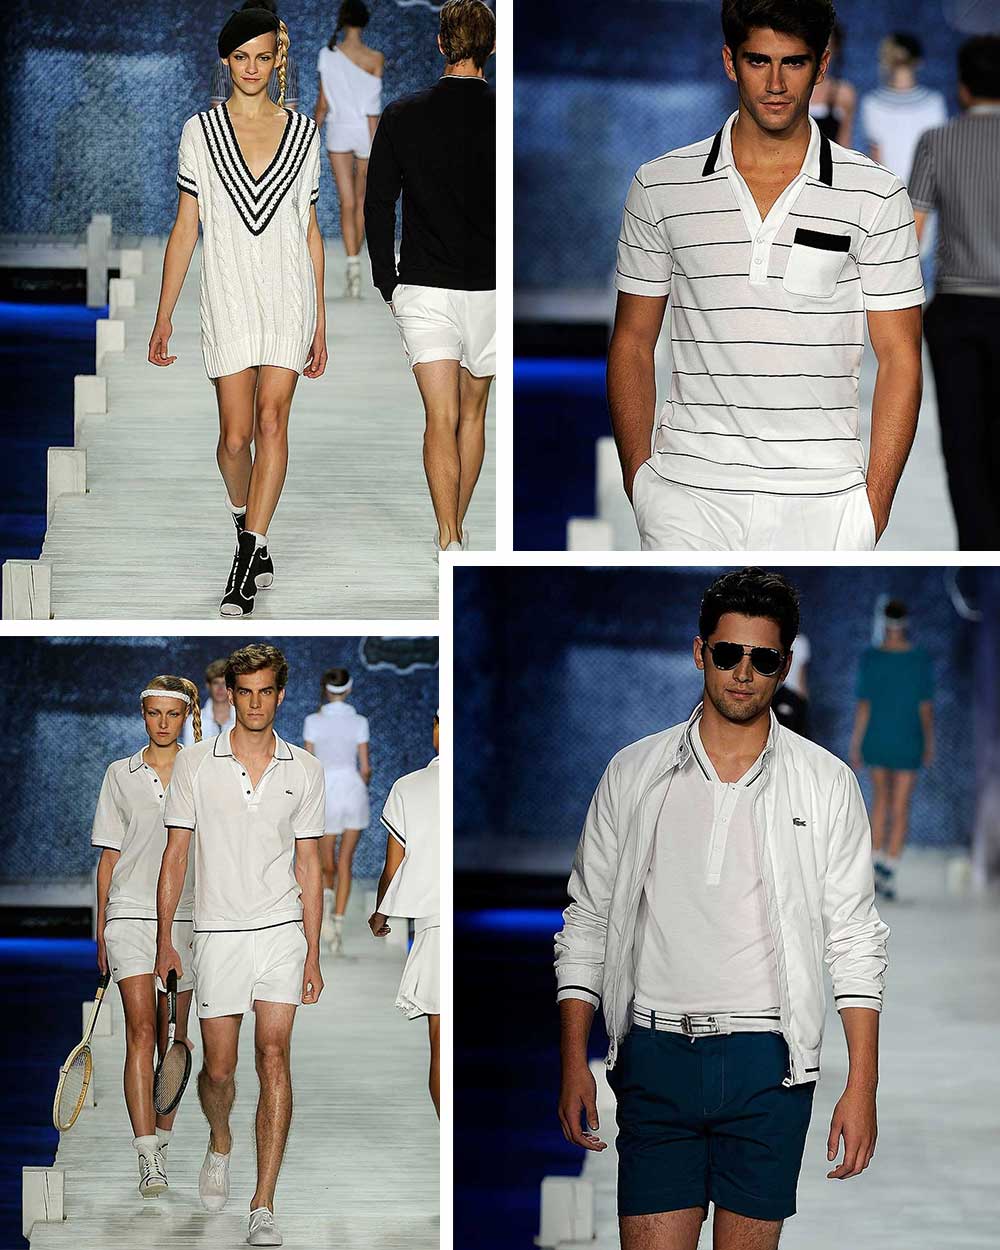 Lacoste - Runway - Spring 2010 MBFW